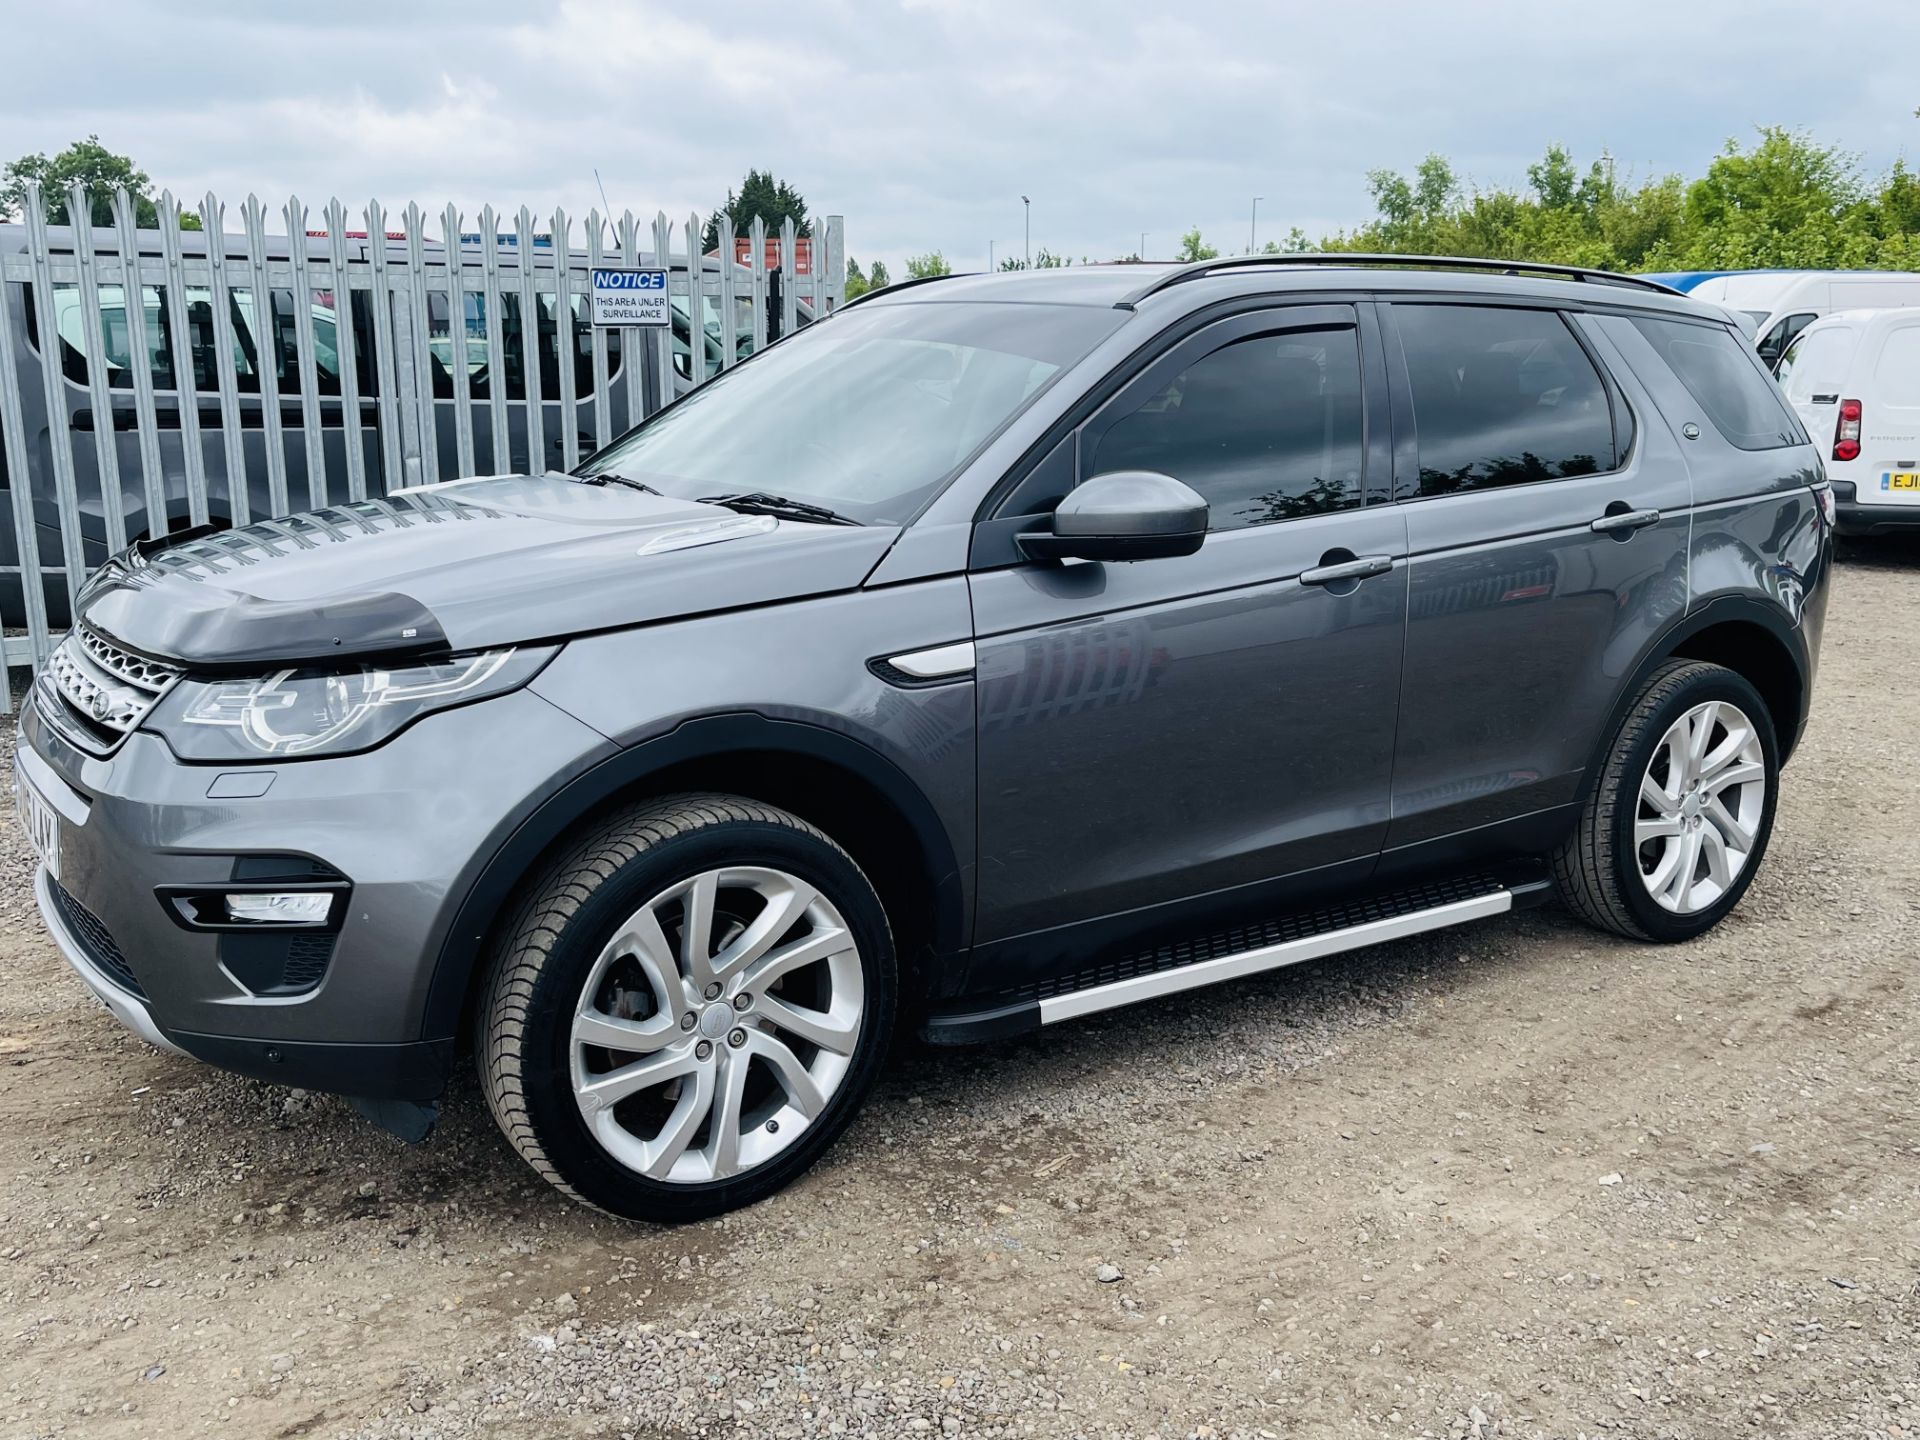 ** ON SALE **Land Rover Discovery sport 2.0 TD4 HSE 2016 '16 Reg' 7 seats - Sat Nav - Euro 6 - - Image 5 of 35